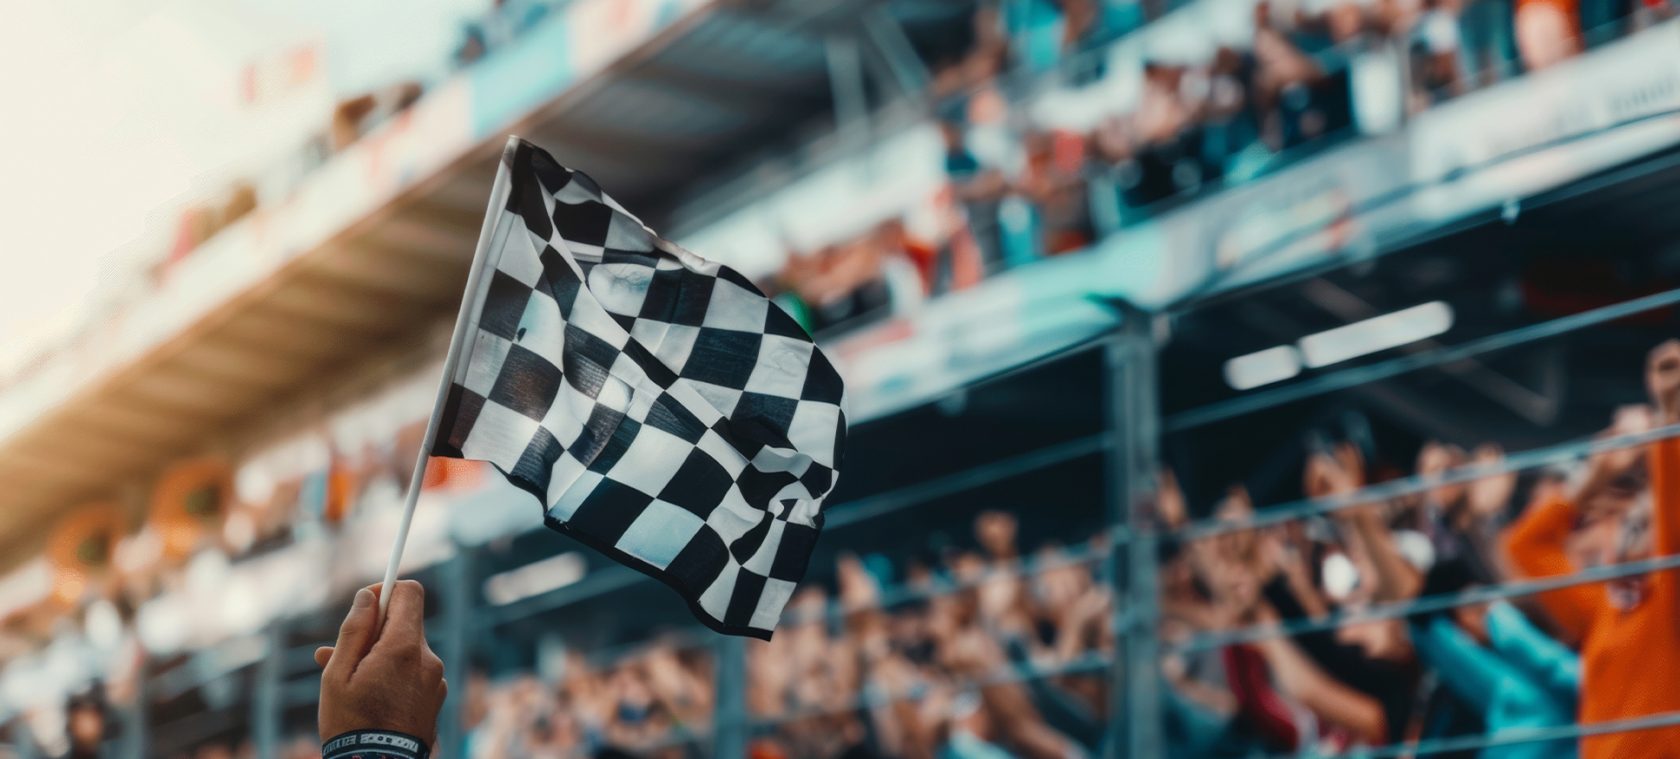 Checkered flag at a race